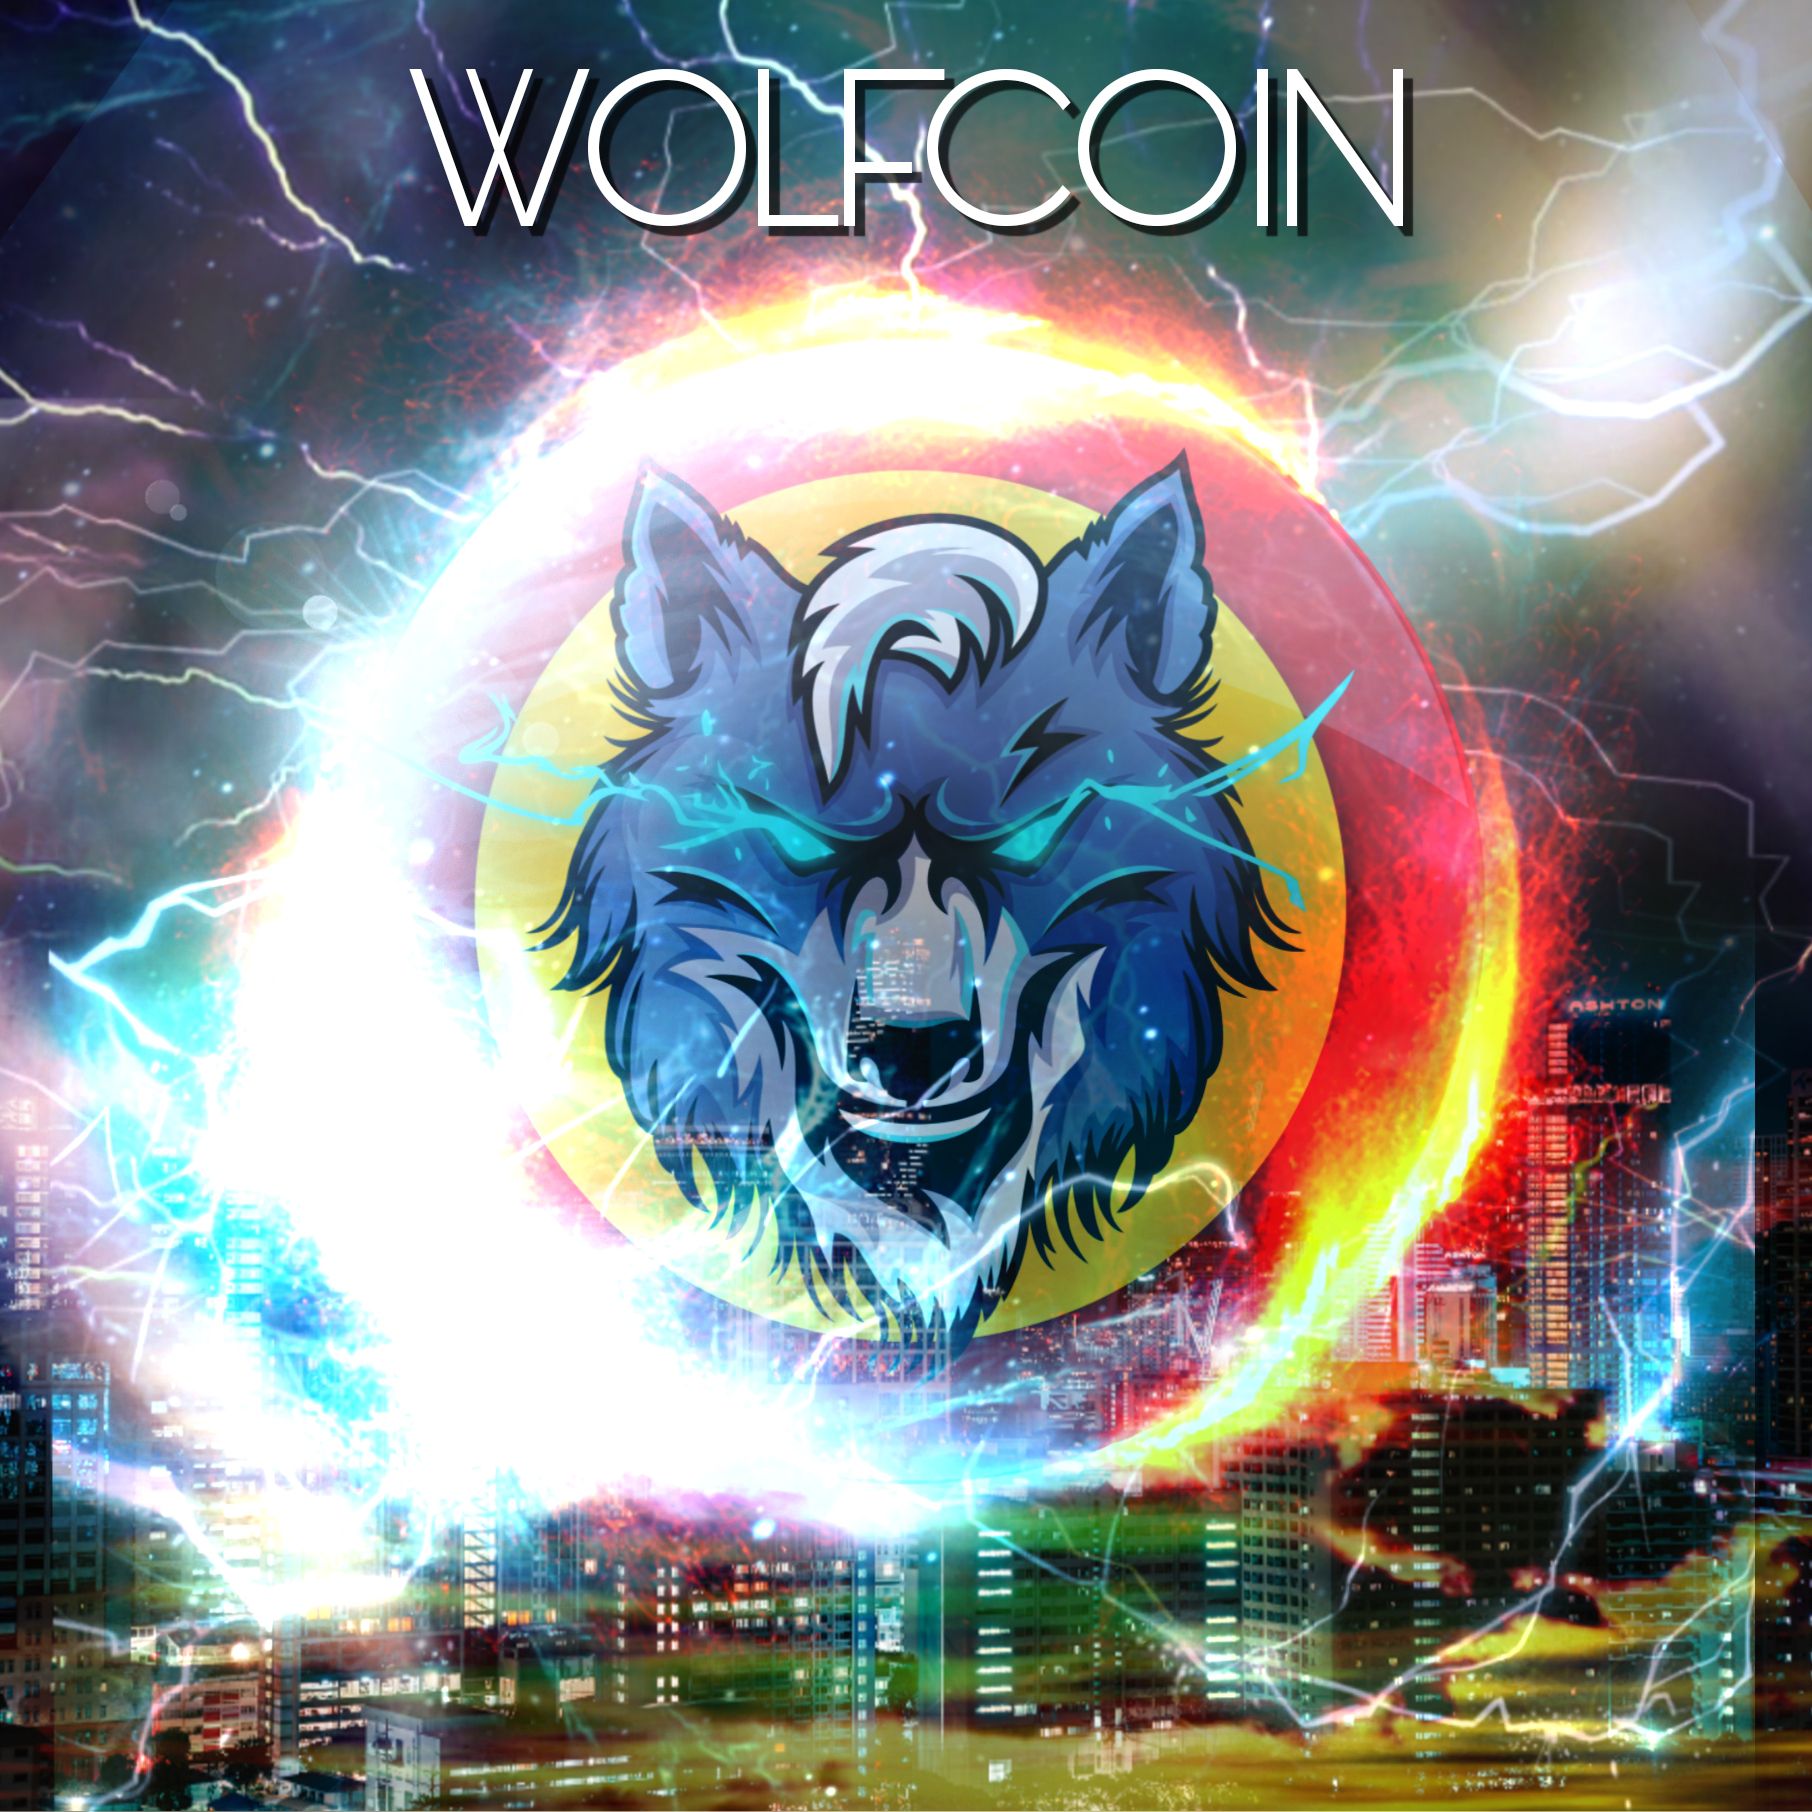 WOLFCOIN is about to take the world by storm. - WOLFCOIN Meme - 울프 밈 - 울프코리아 WOLFKOREAcloseclosecloseclosecloseclosecloseclosecloseclose : Picsart_23-03-17_16-08-25-676.jpg